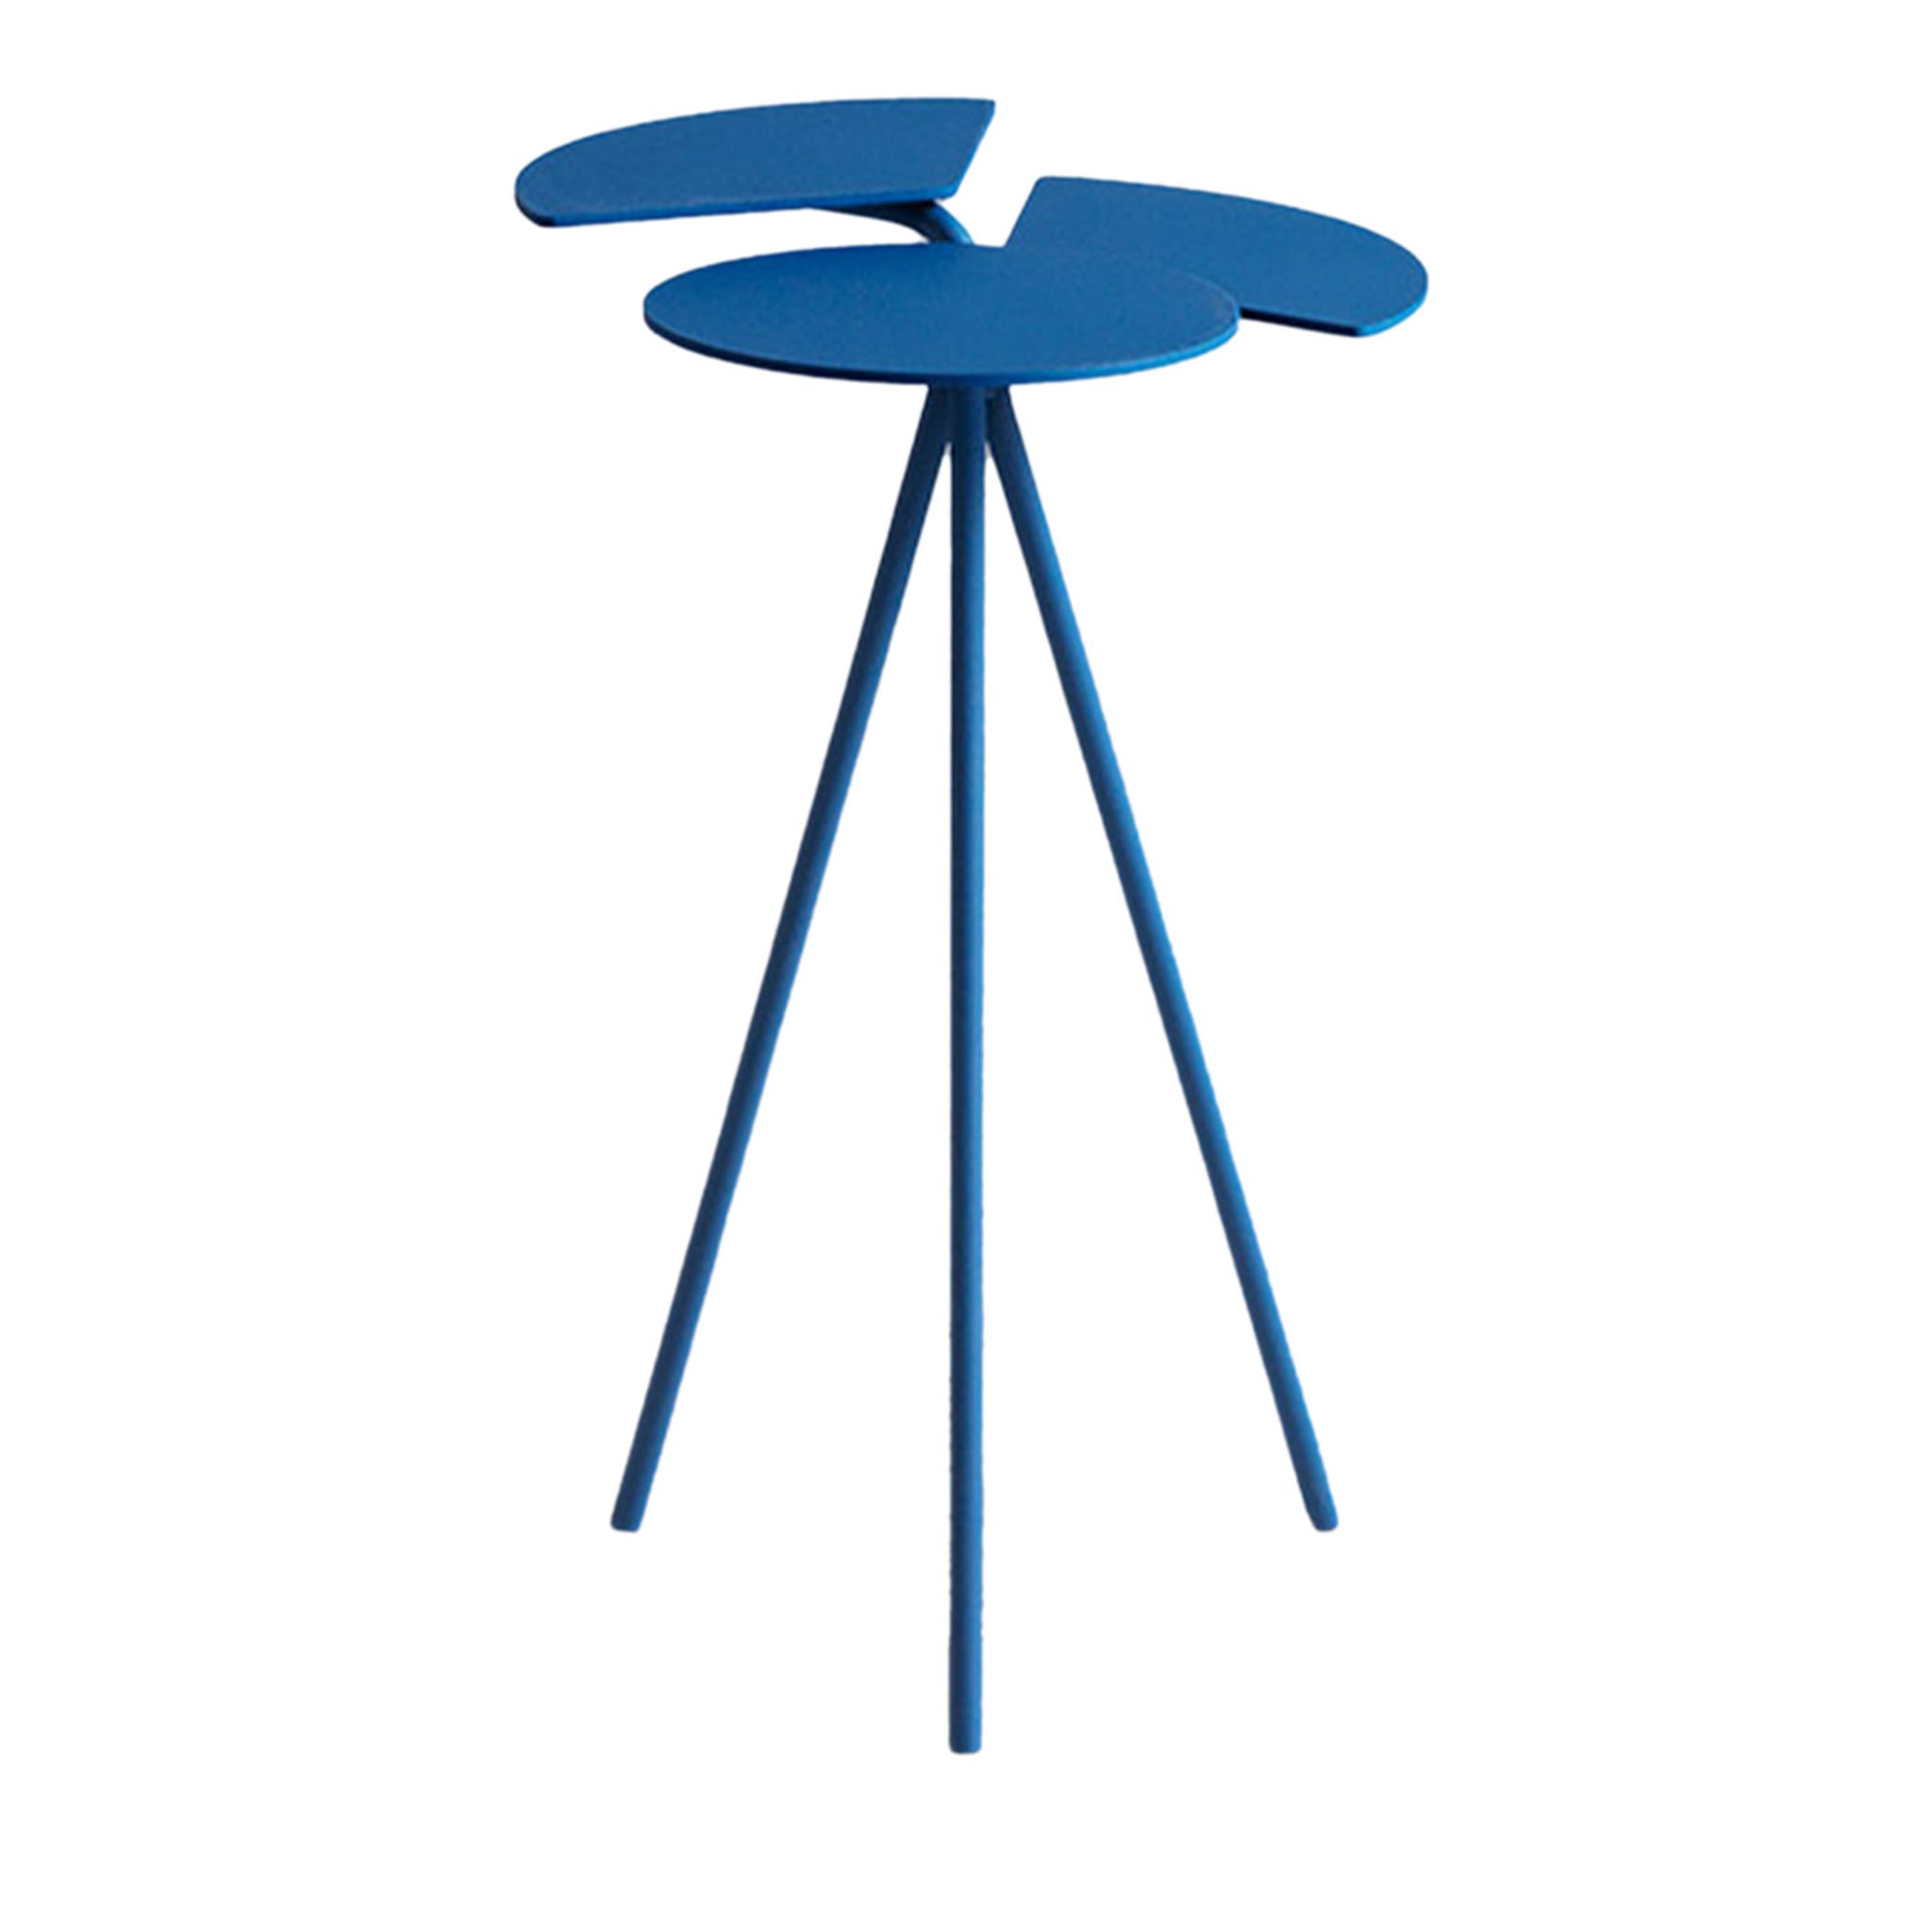 Lady Bug Blue Accent Table by Angeletti Ruzza - Main view